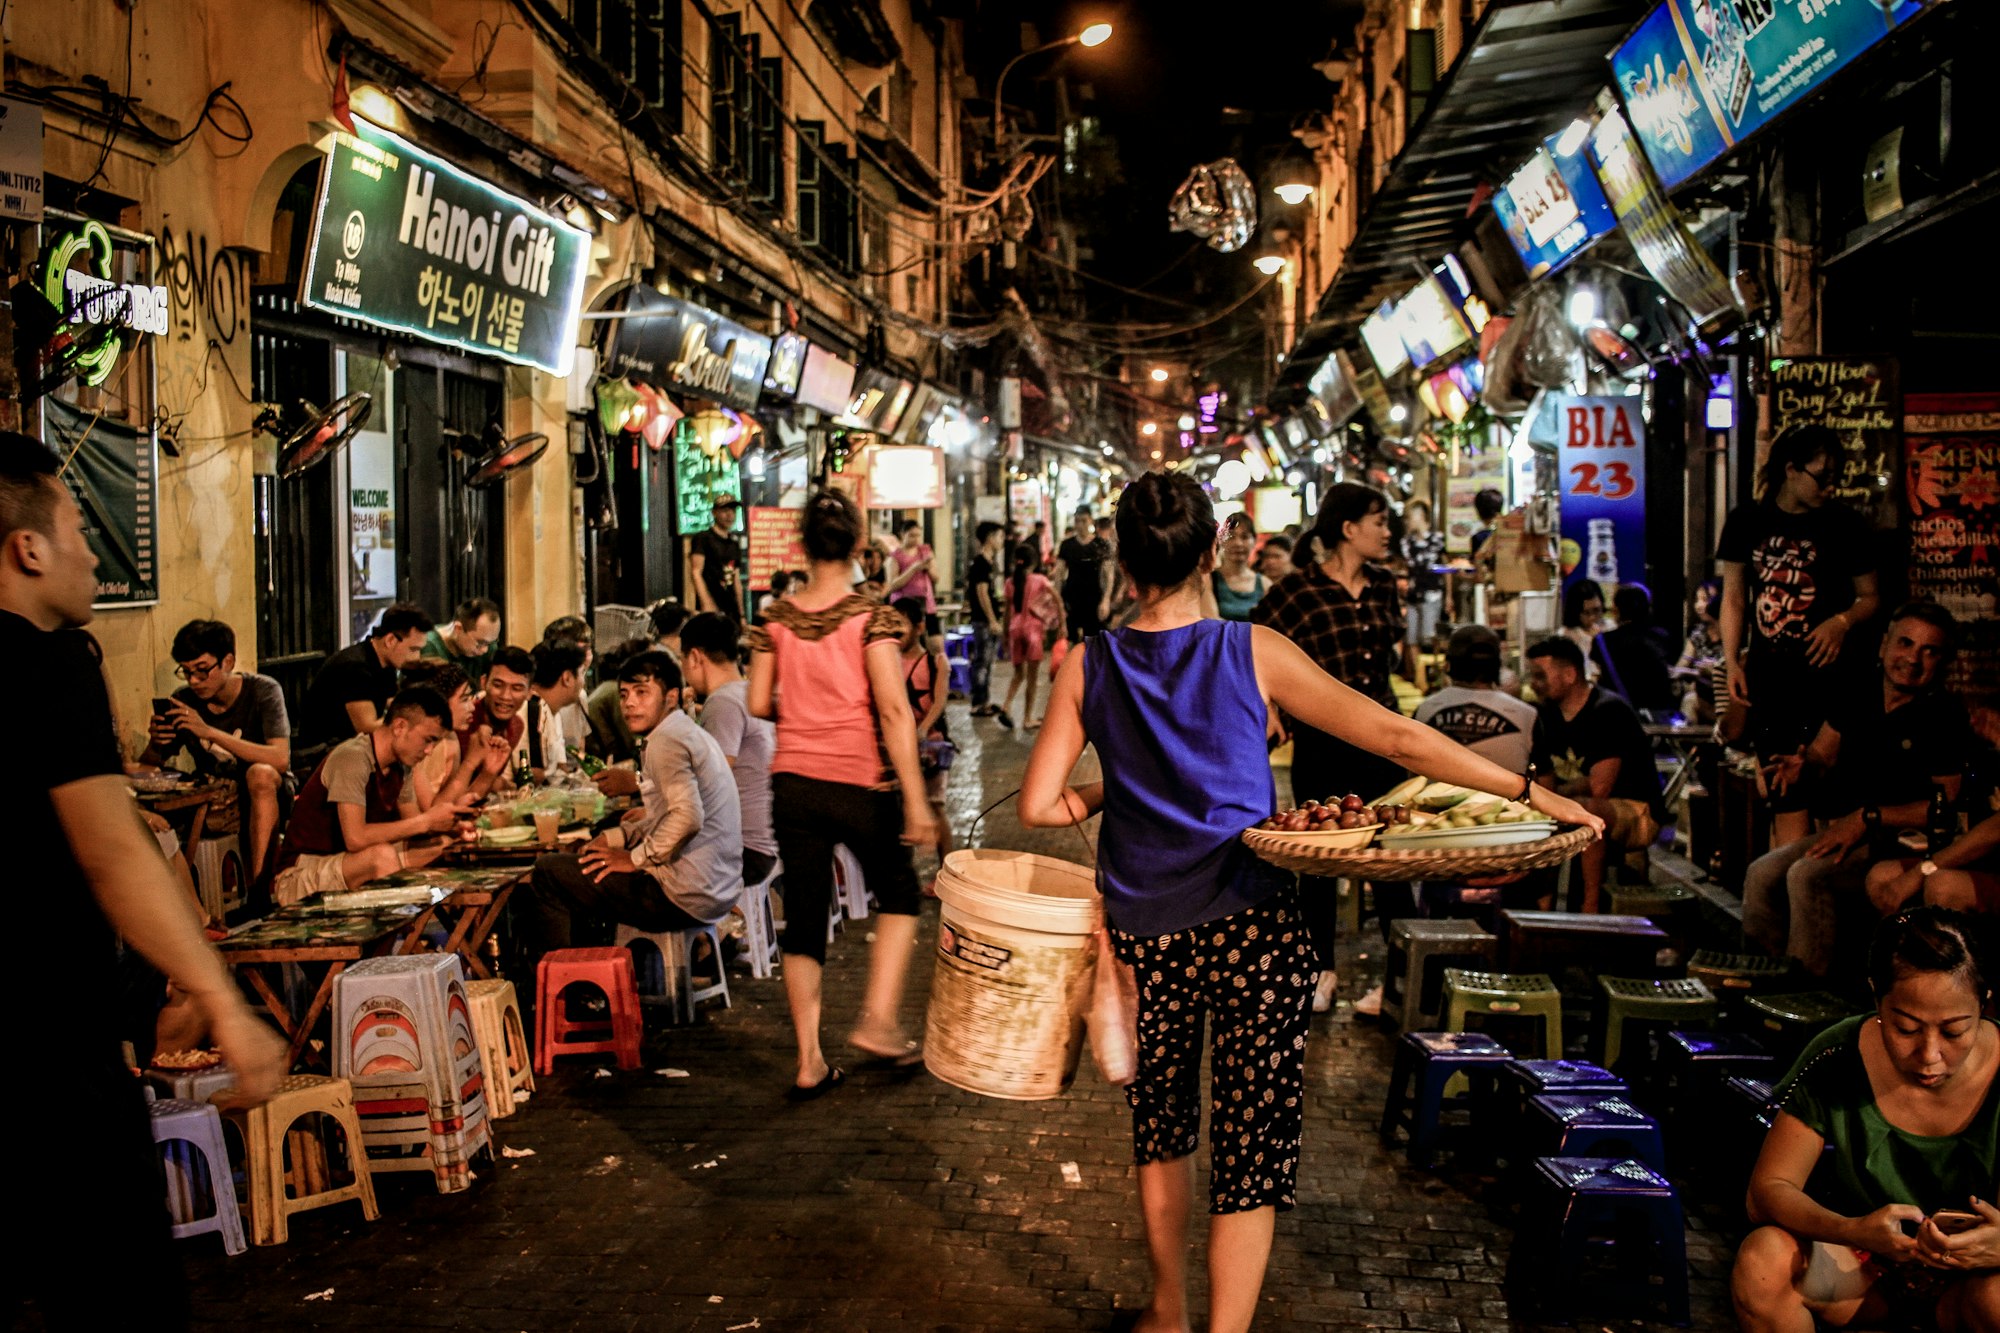 10 Best Places to Go Shopping in Hanoi - Where to Shop in Hanoi